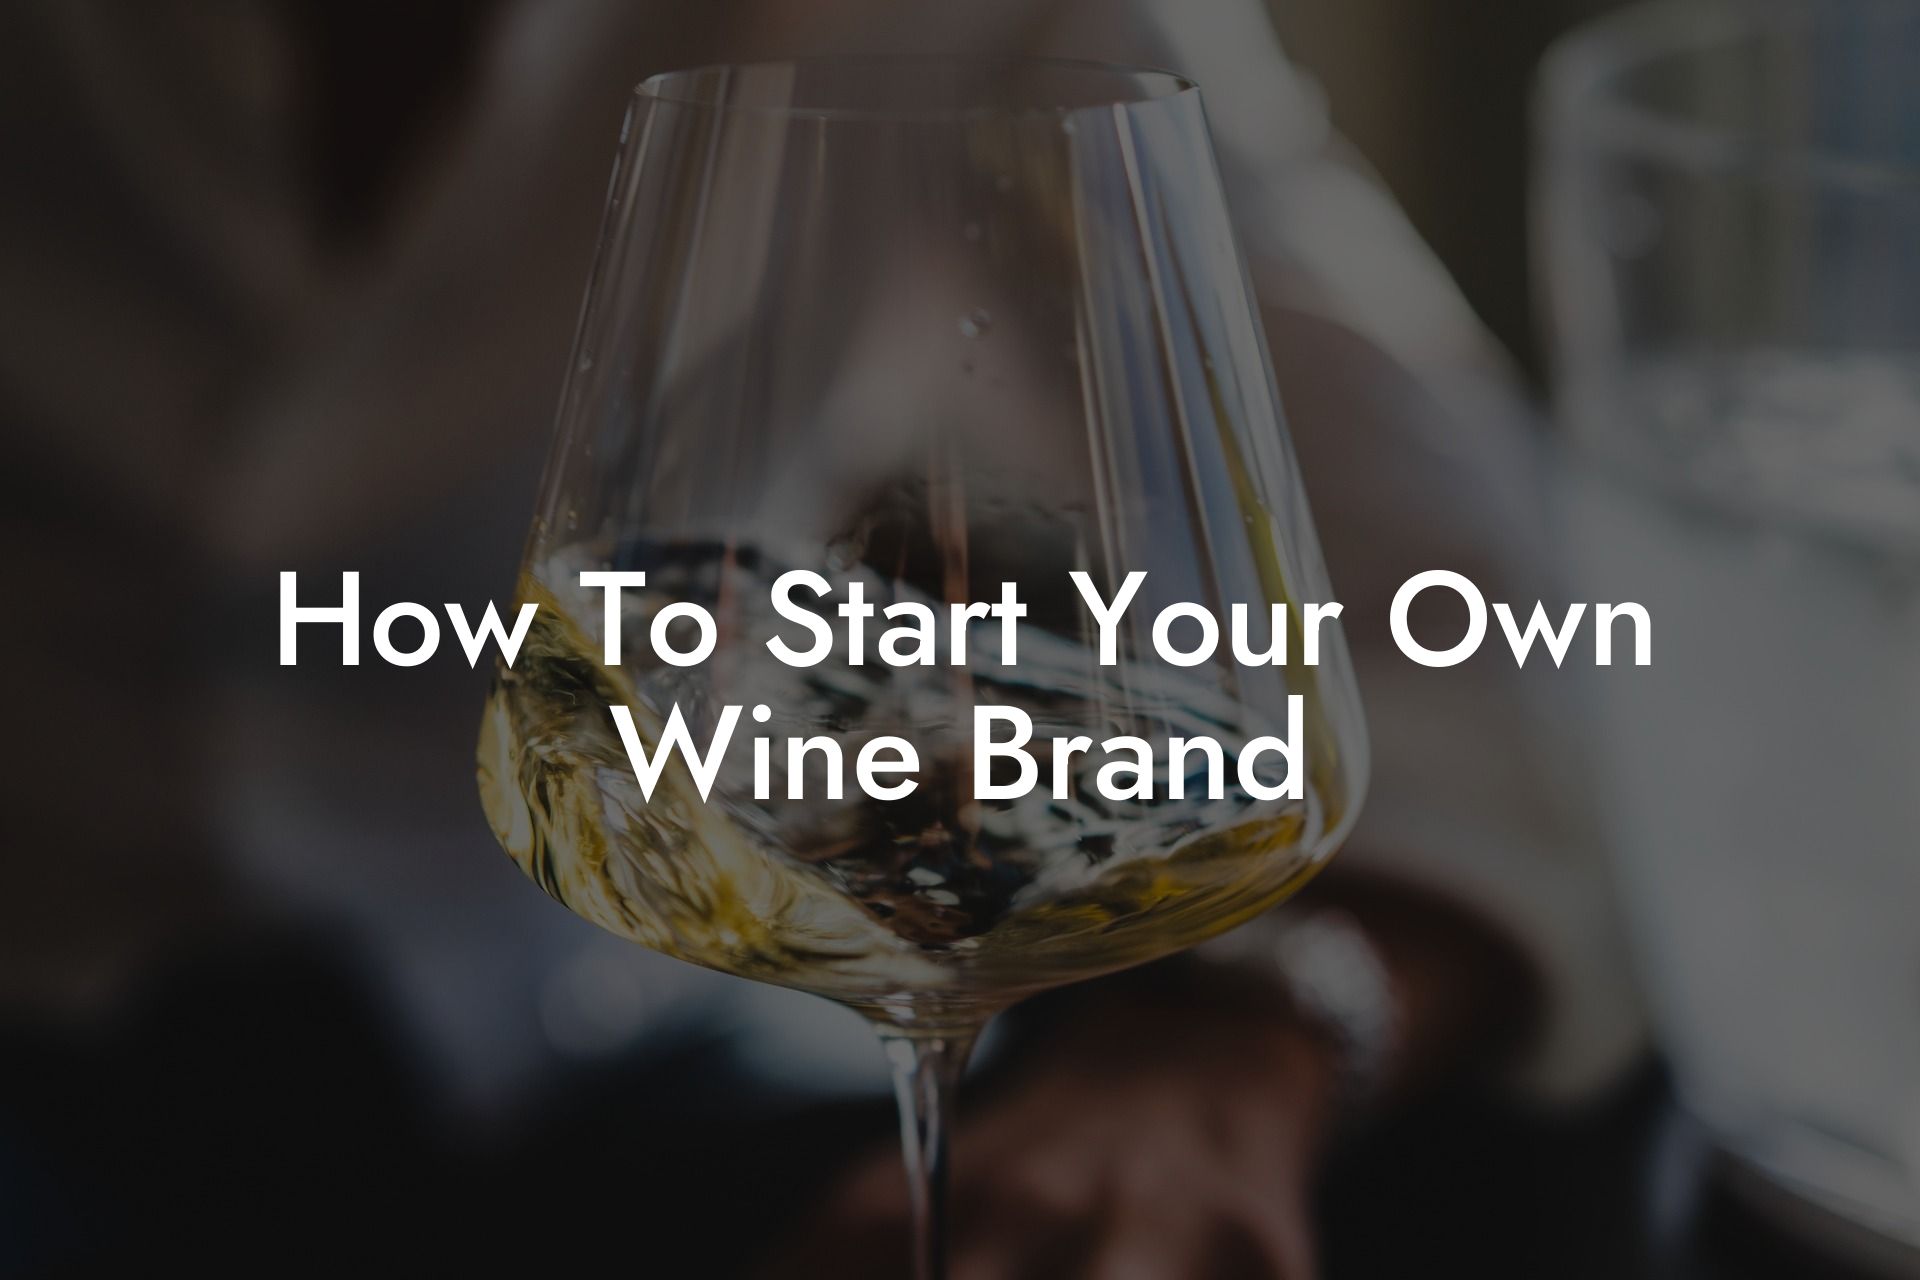 How To Start Your Own Wine Brand